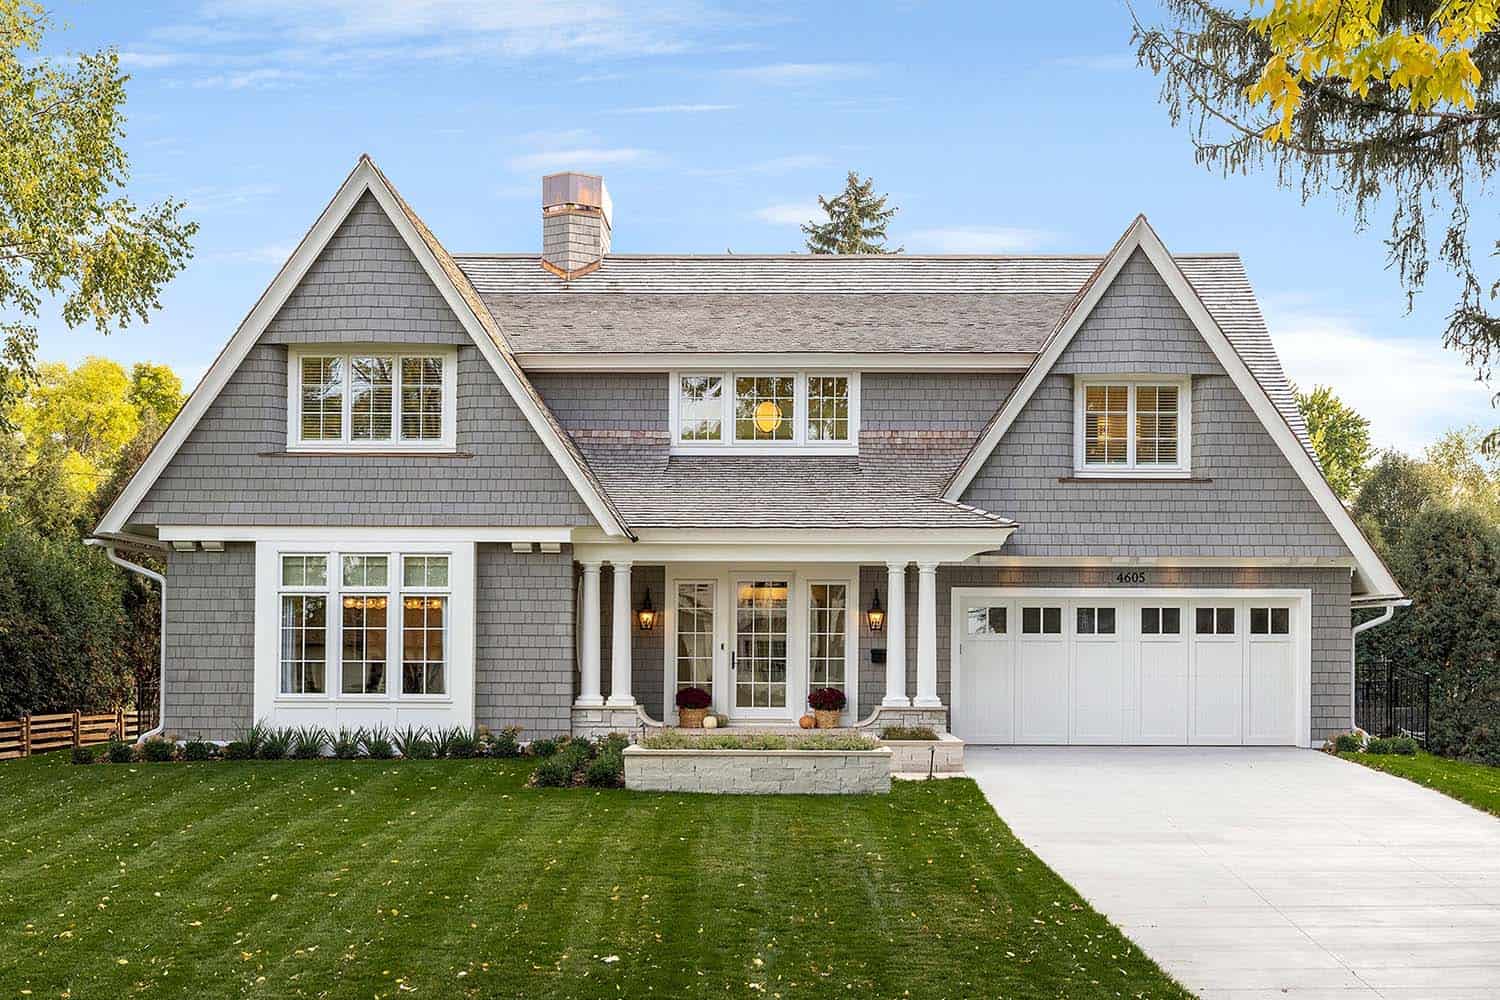 Peek inside this charming and timeless shingle style house in Minnesota